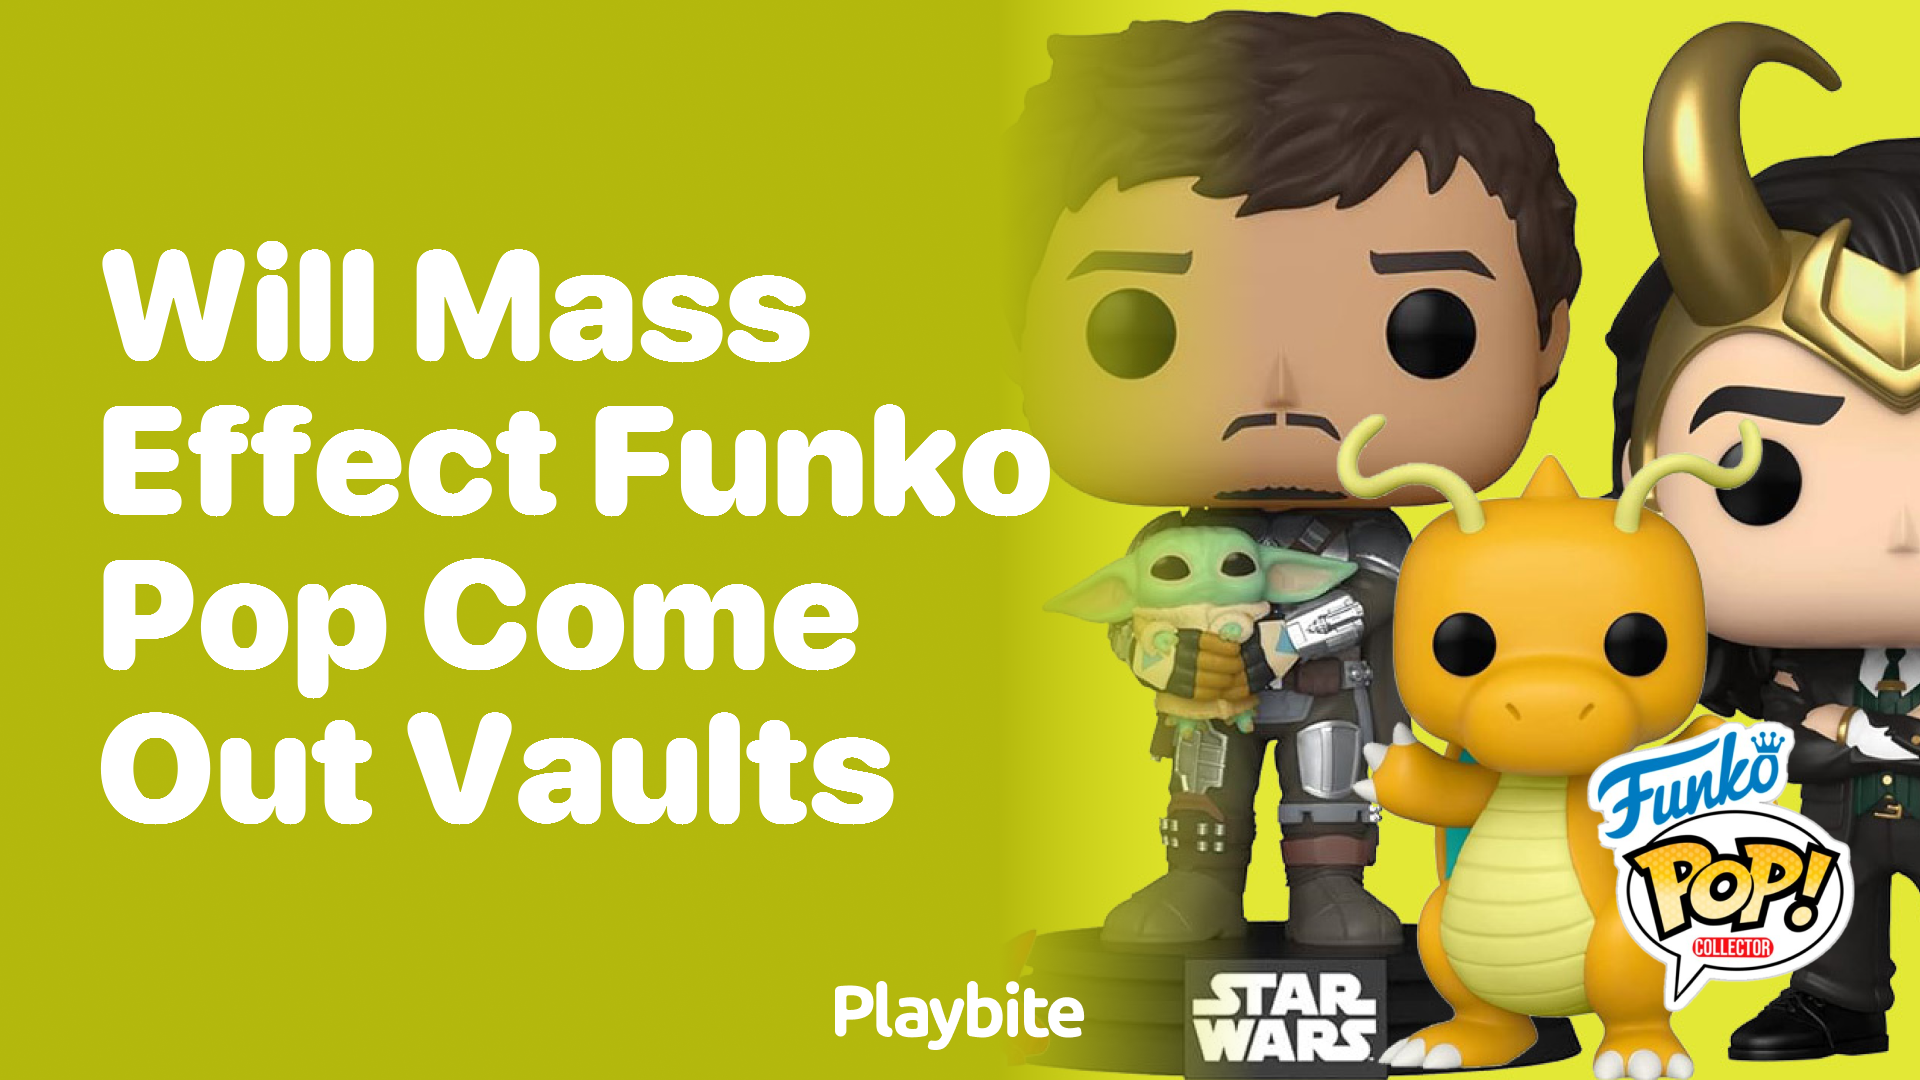 Will Mass Effect Funko Pop come out of the vaults?